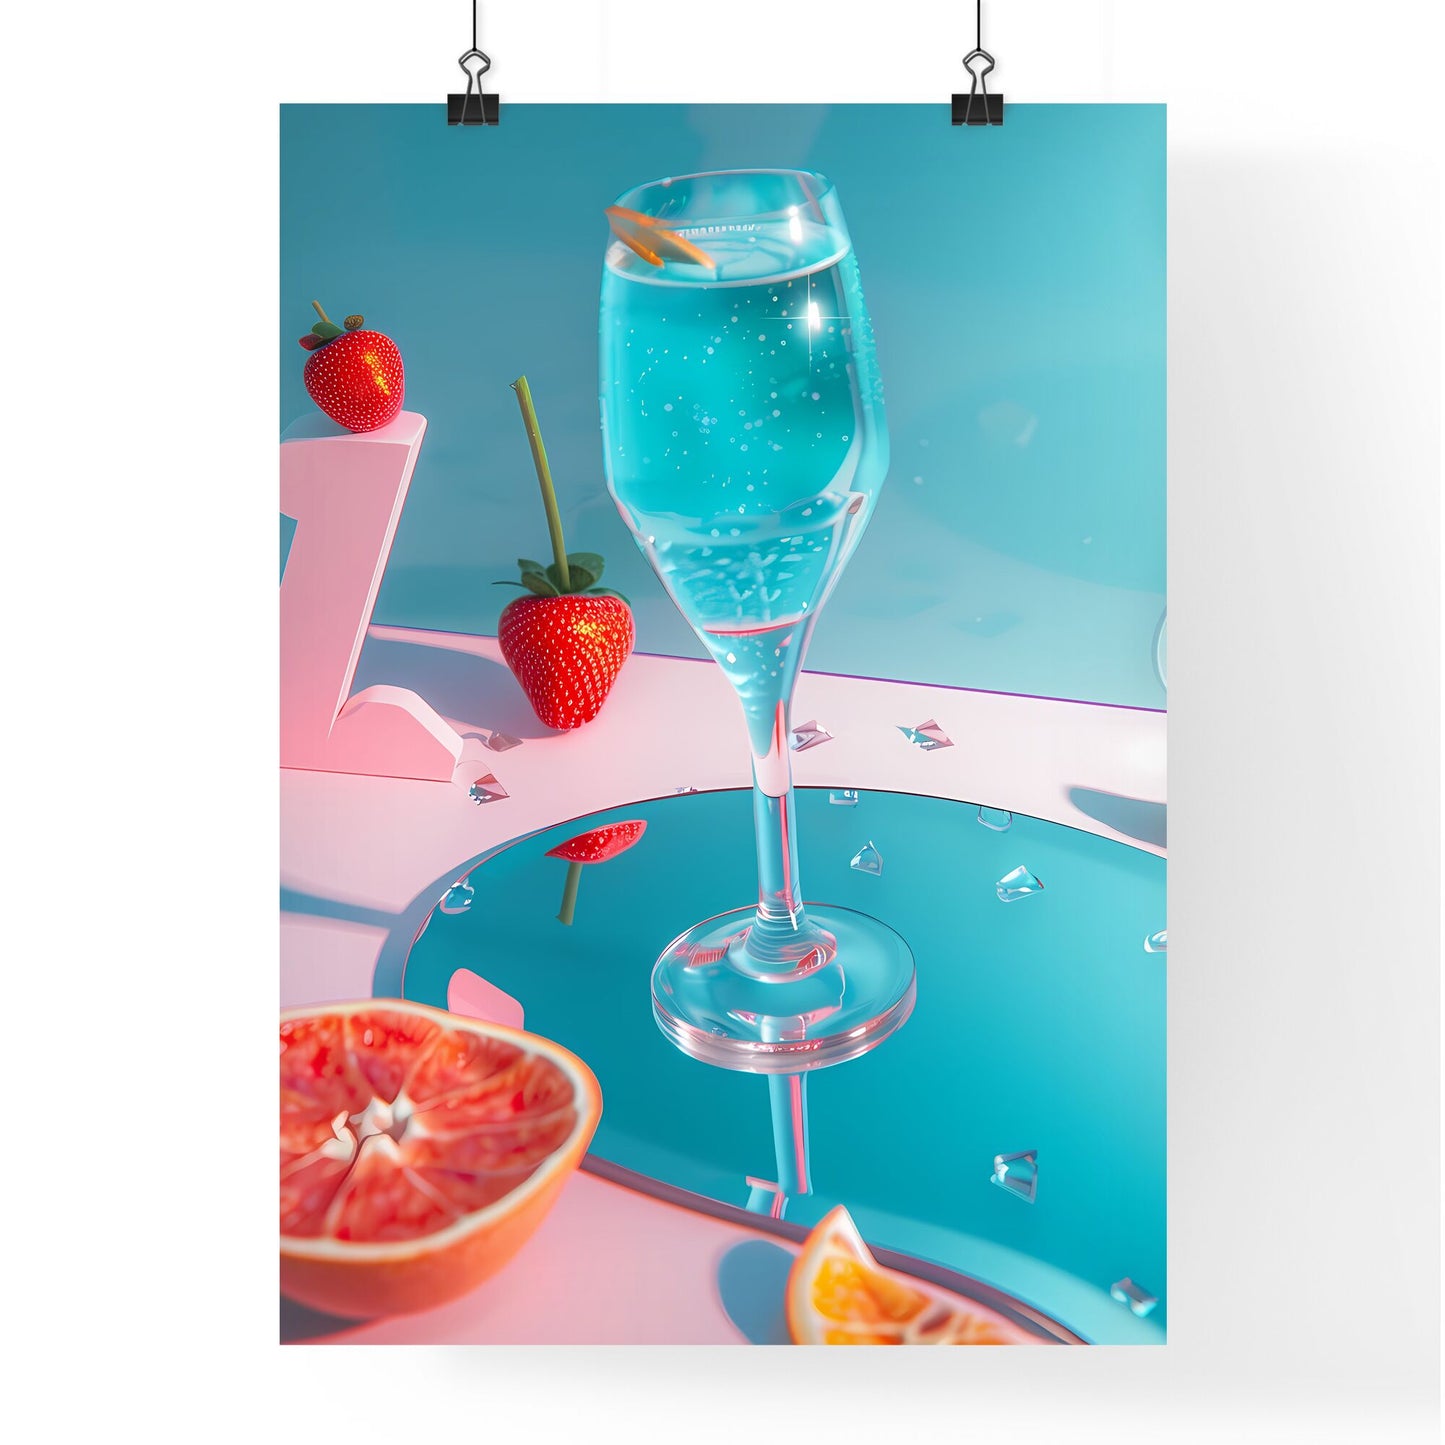 Isometric Angle Still Life: Modern Trendy Glass of Blue Drink with Dried Orange Slice, Strawberry on Pink Pedestal, and Vibrant Art Aspect Default Title